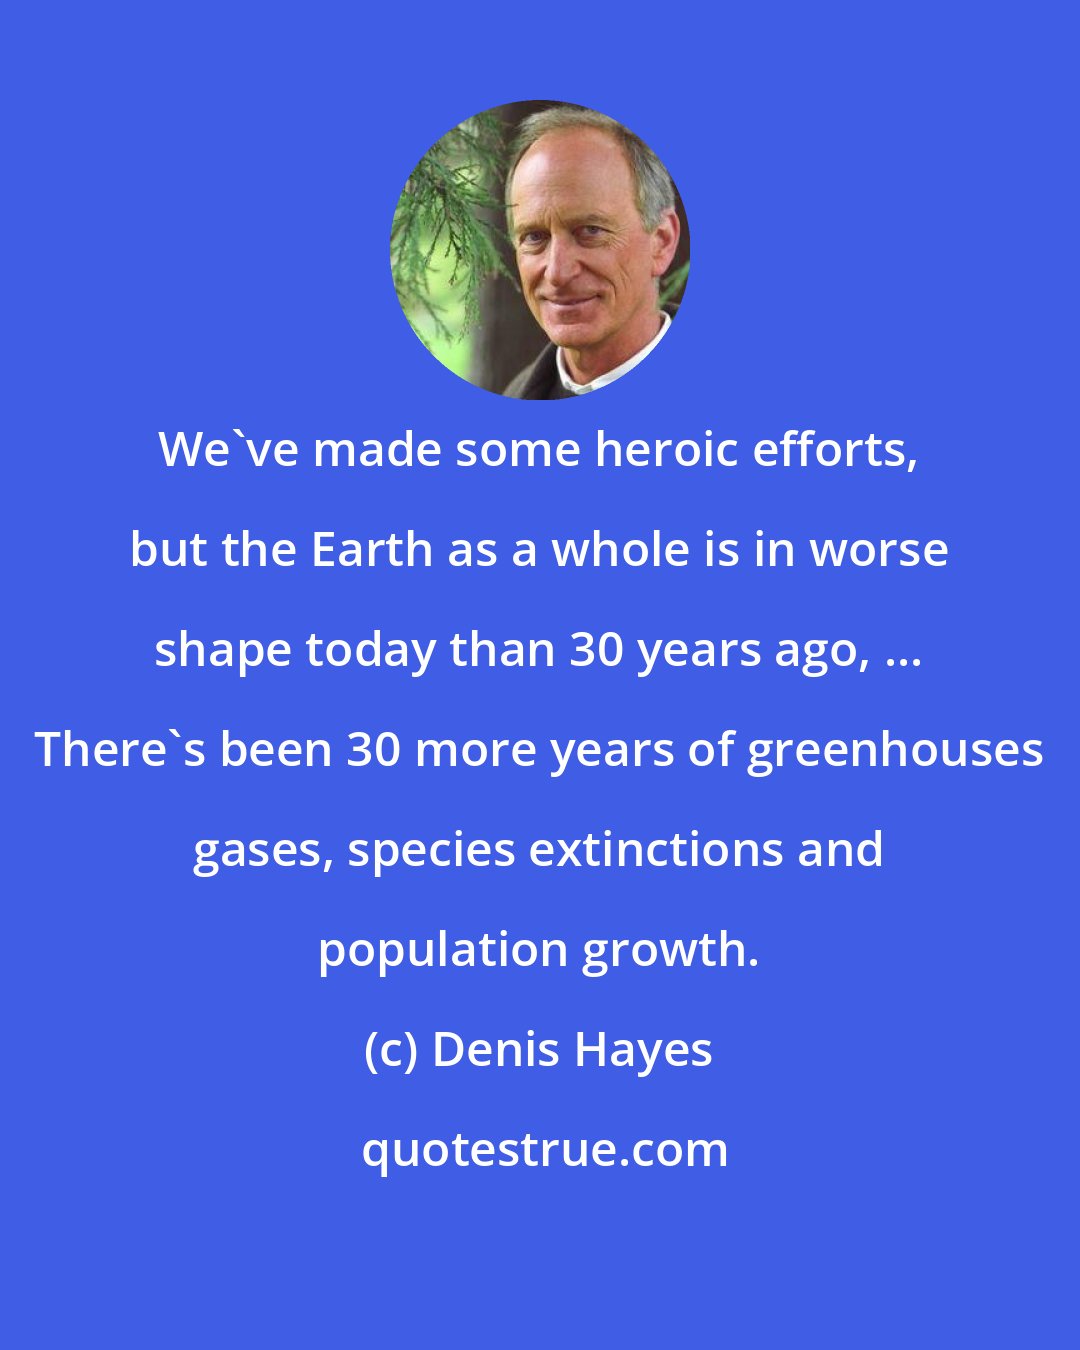 Denis Hayes: We've made some heroic efforts, but the Earth as a whole is in worse shape today than 30 years ago, ... There's been 30 more years of greenhouses gases, species extinctions and population growth.